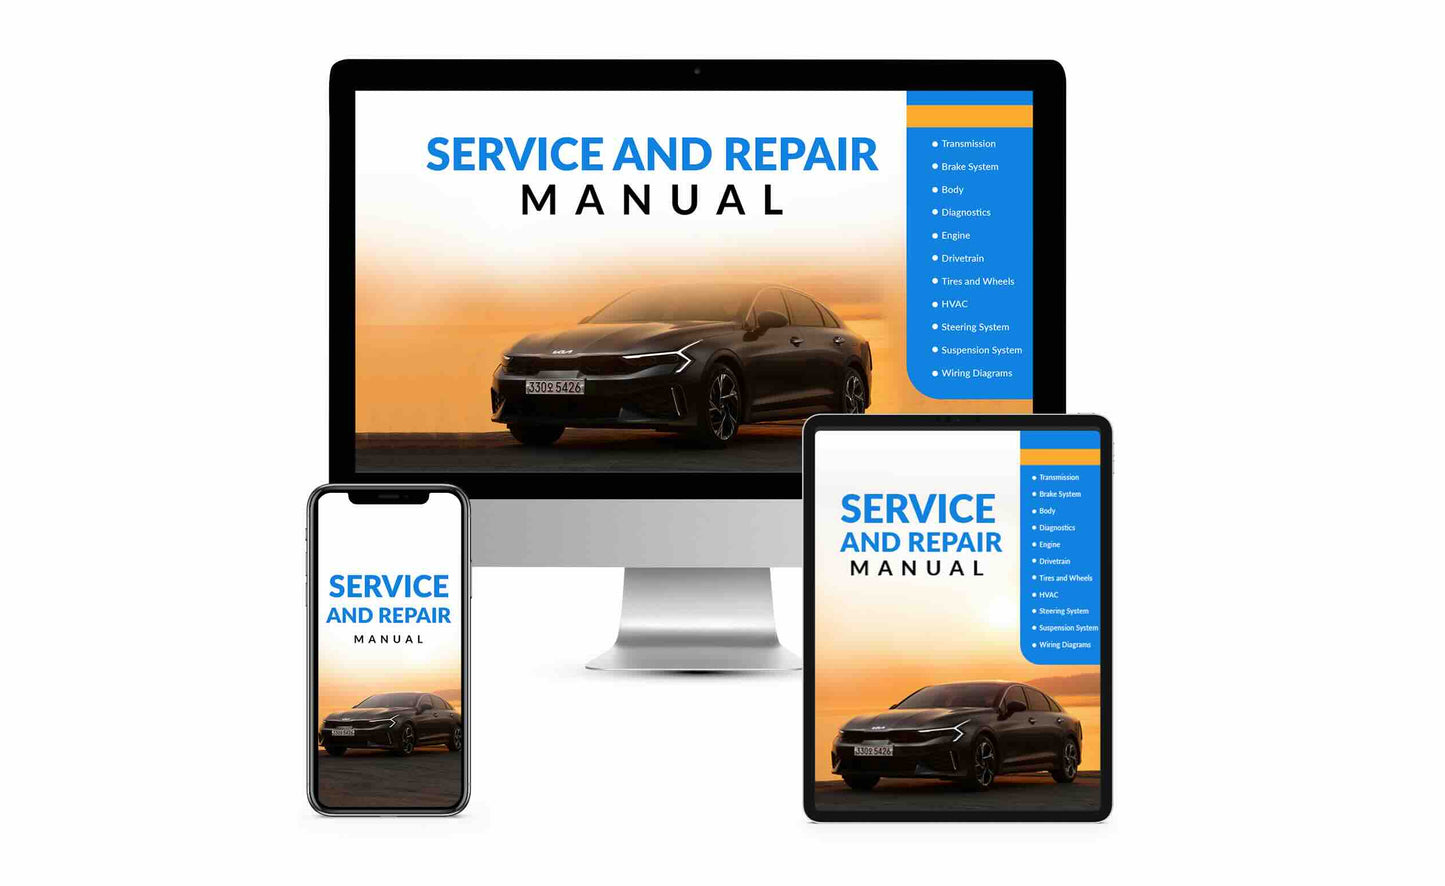 2022 Toyota Avalon Service and Repair Manual